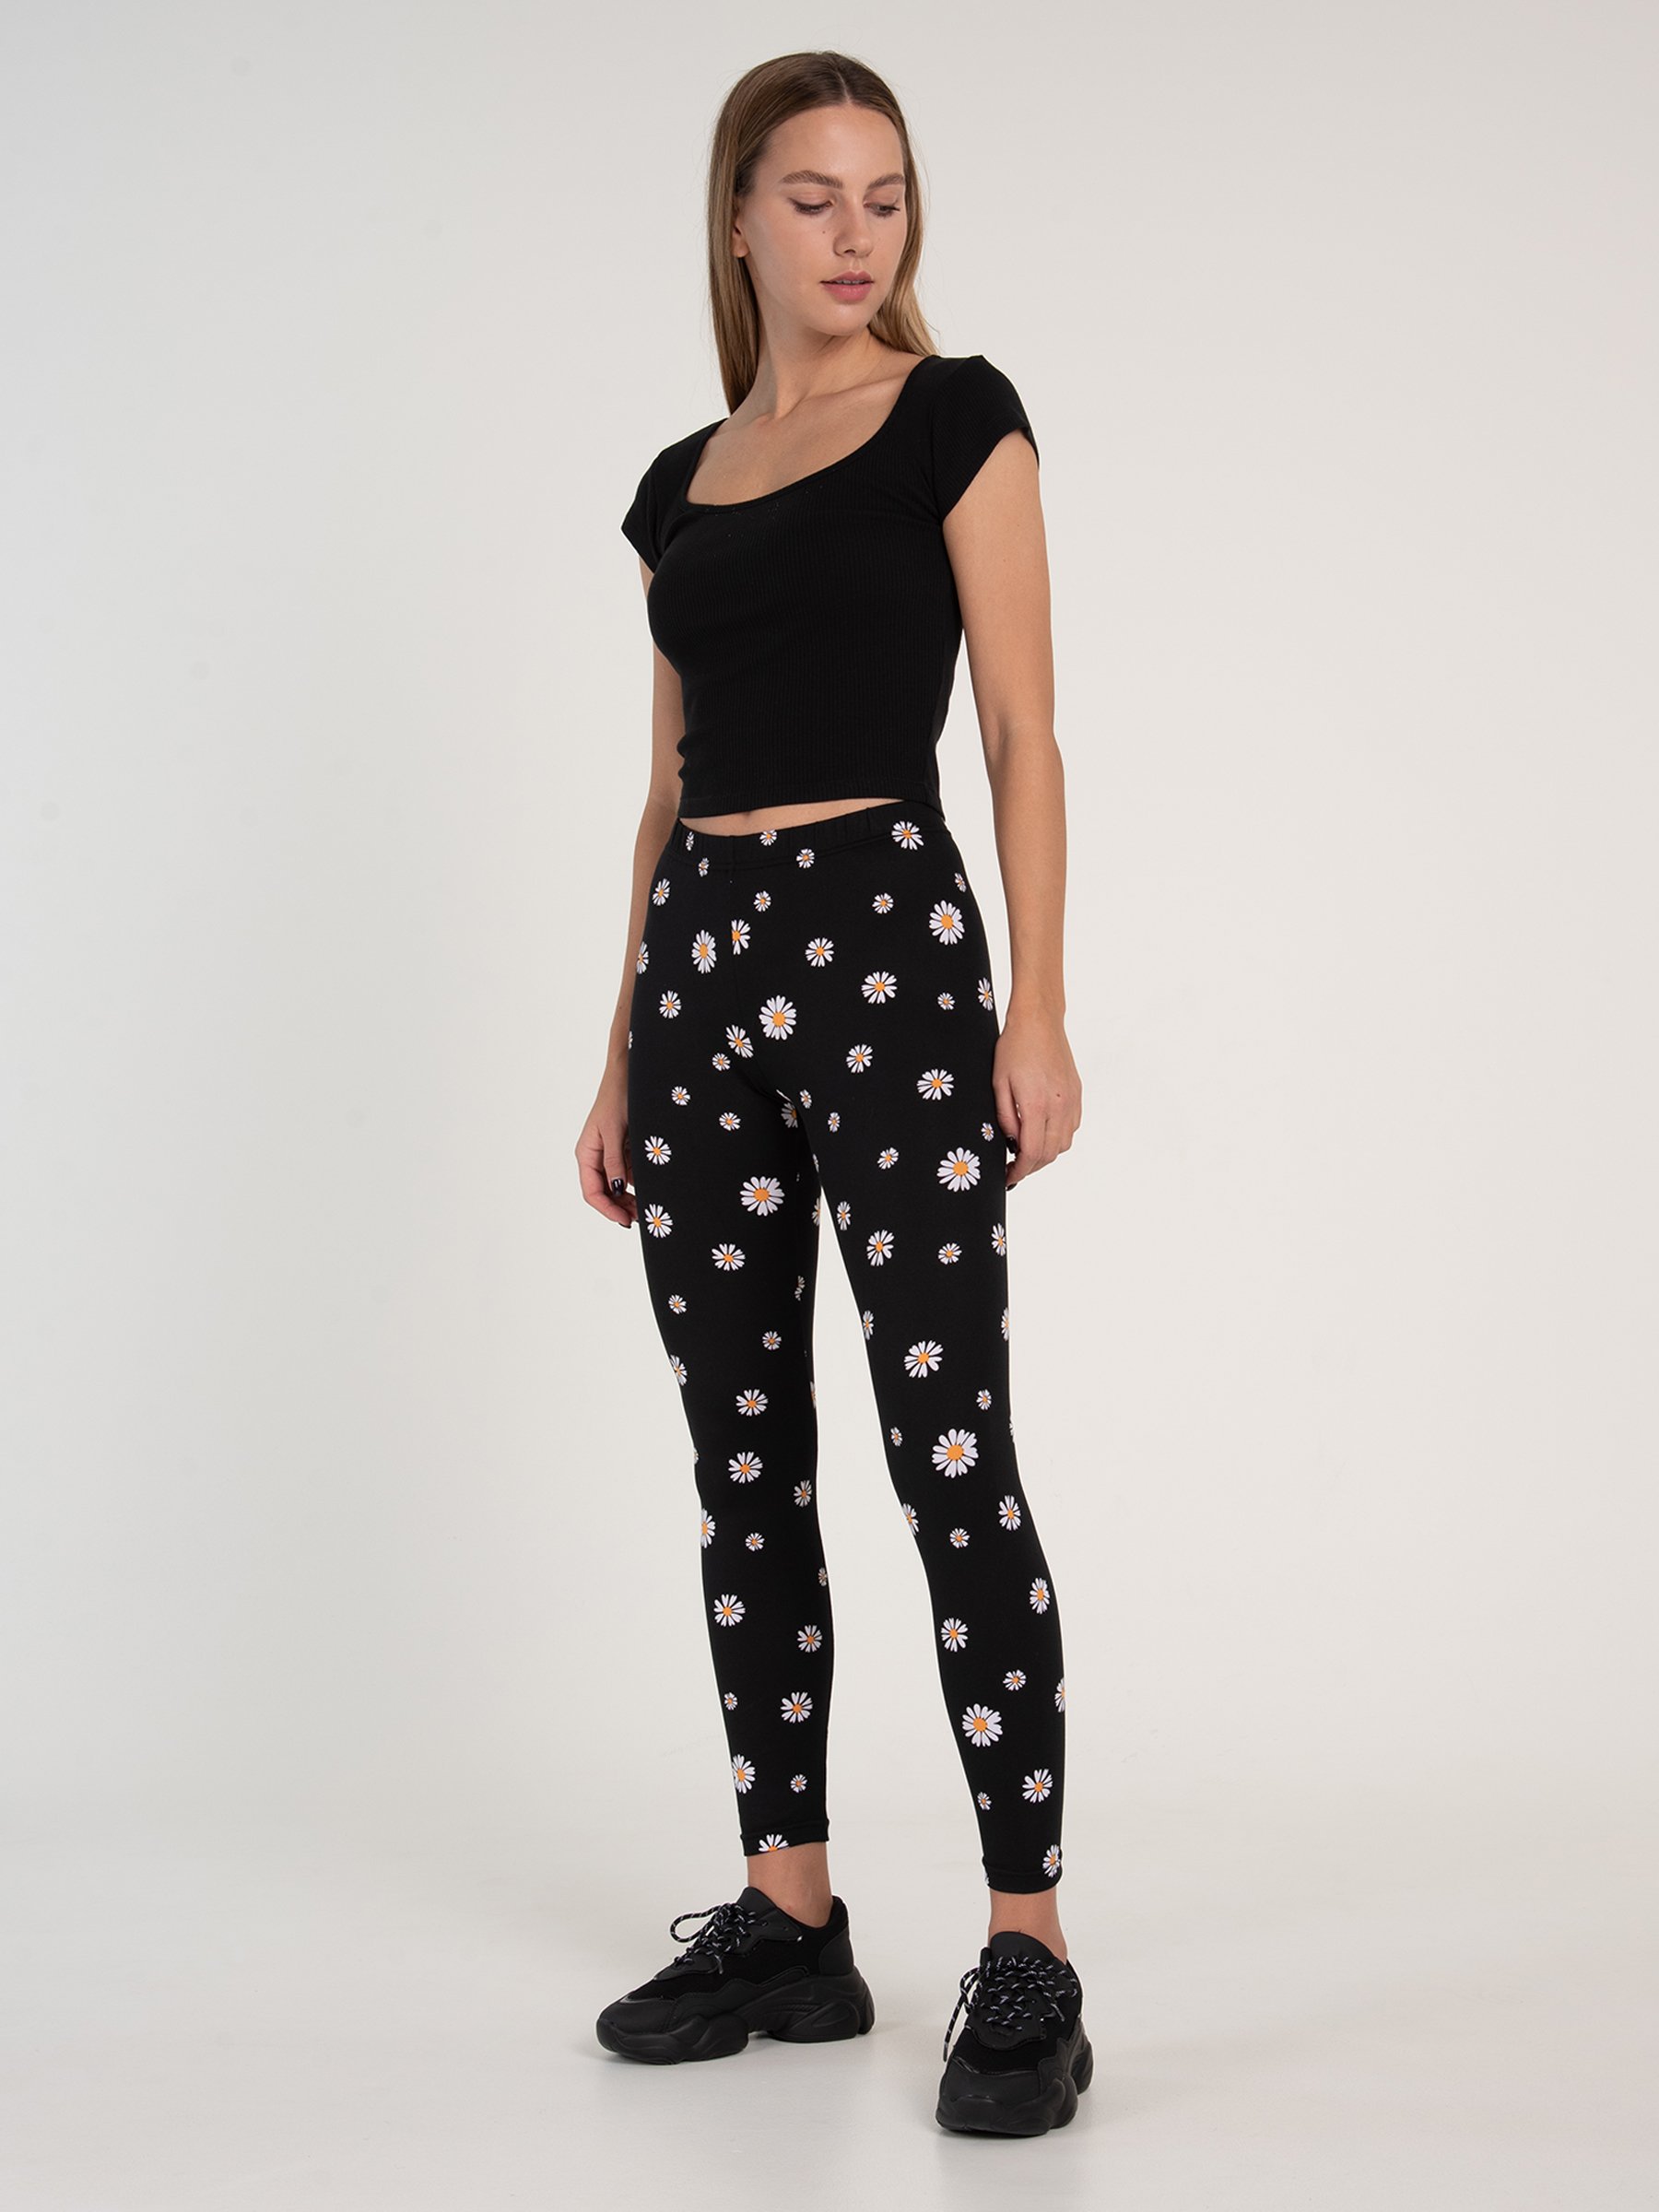 Canoan Spring Floral Leggings – Sexy Unique Outfits, LLC